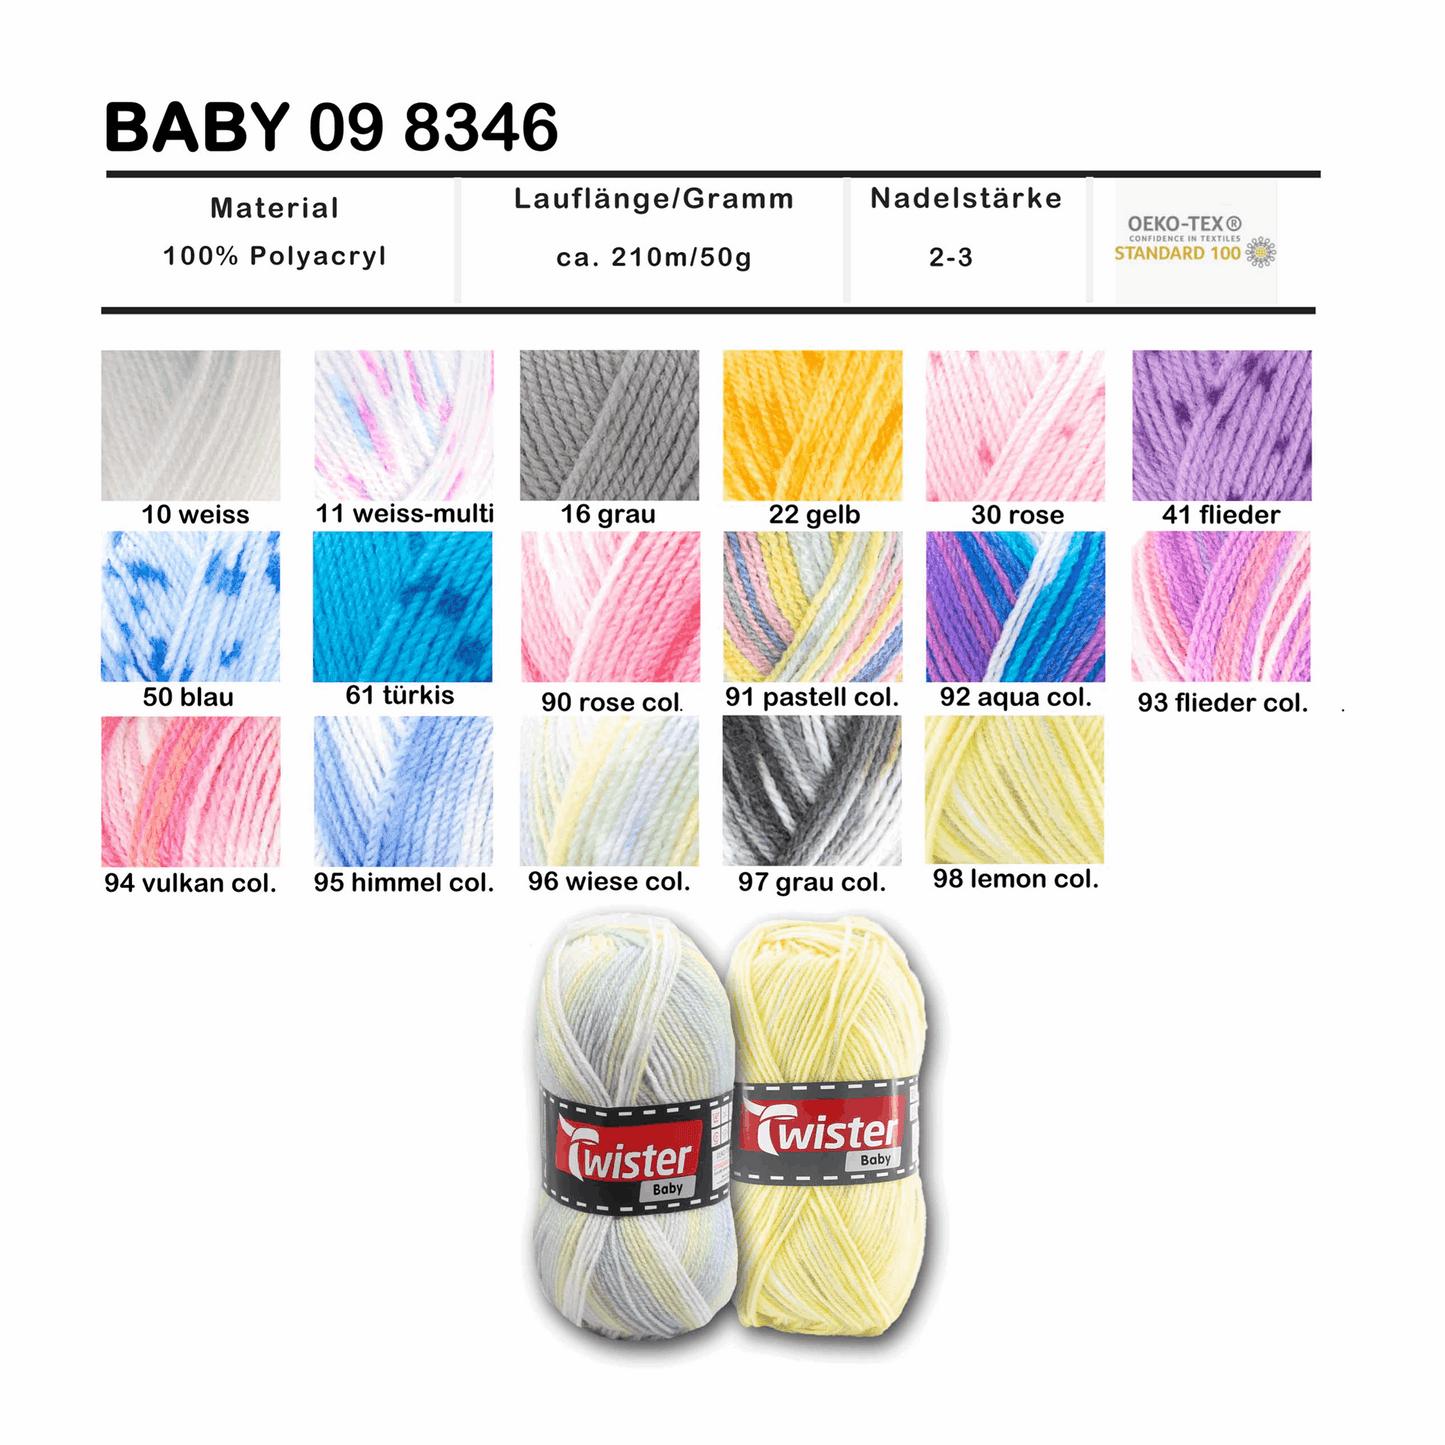 Twister Baby, 50g, 98346, Farbe wiese color 96